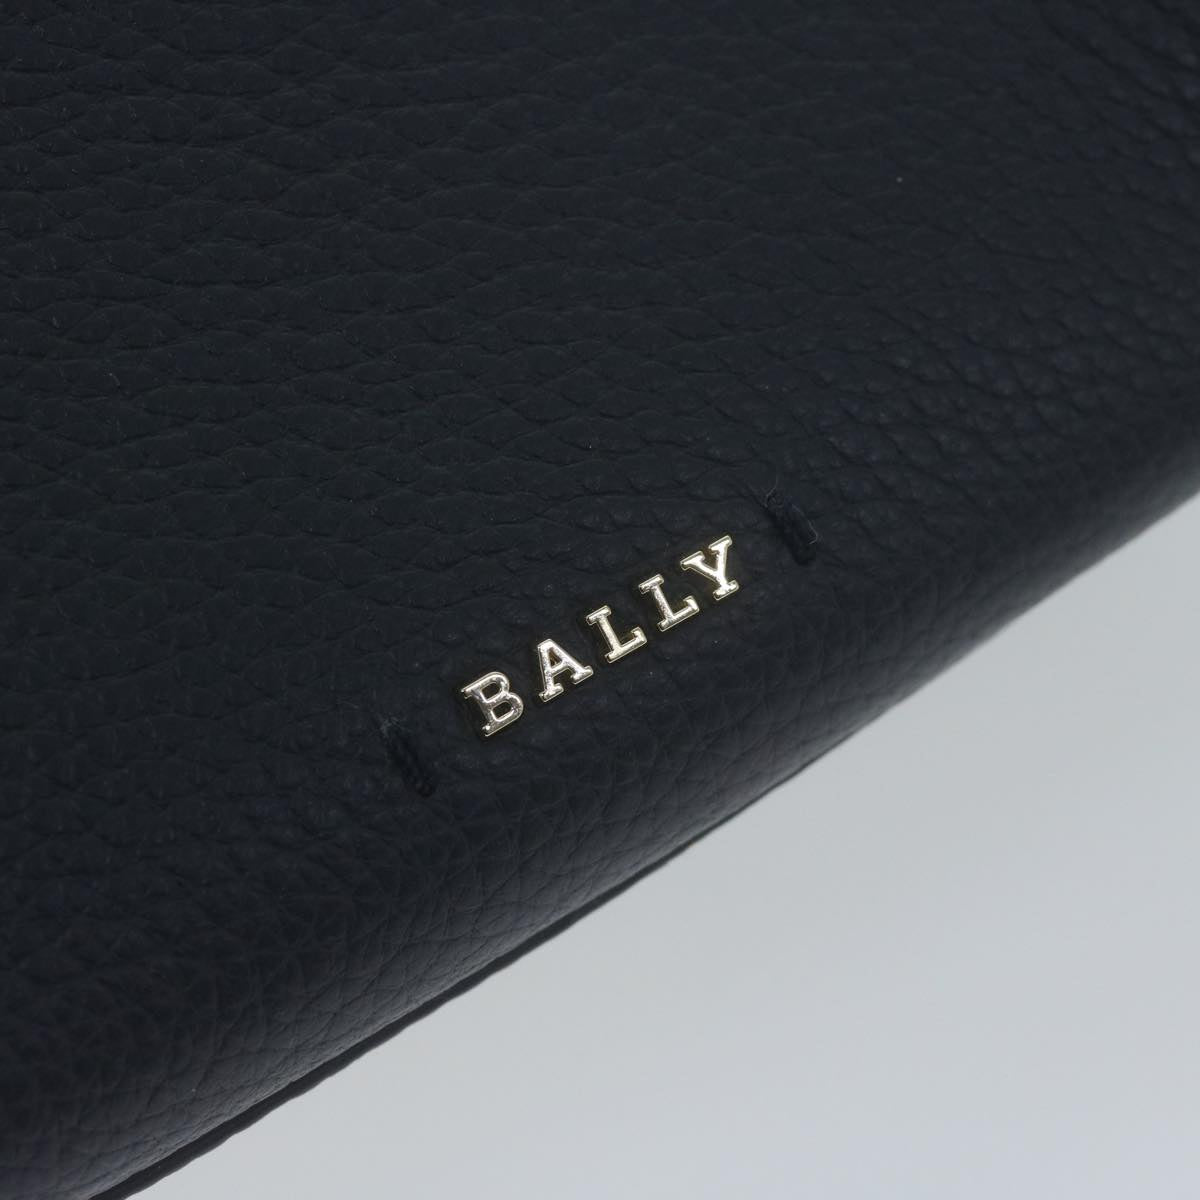 BALLY Shoulder Bag Leather 2way Navy Auth yk10576